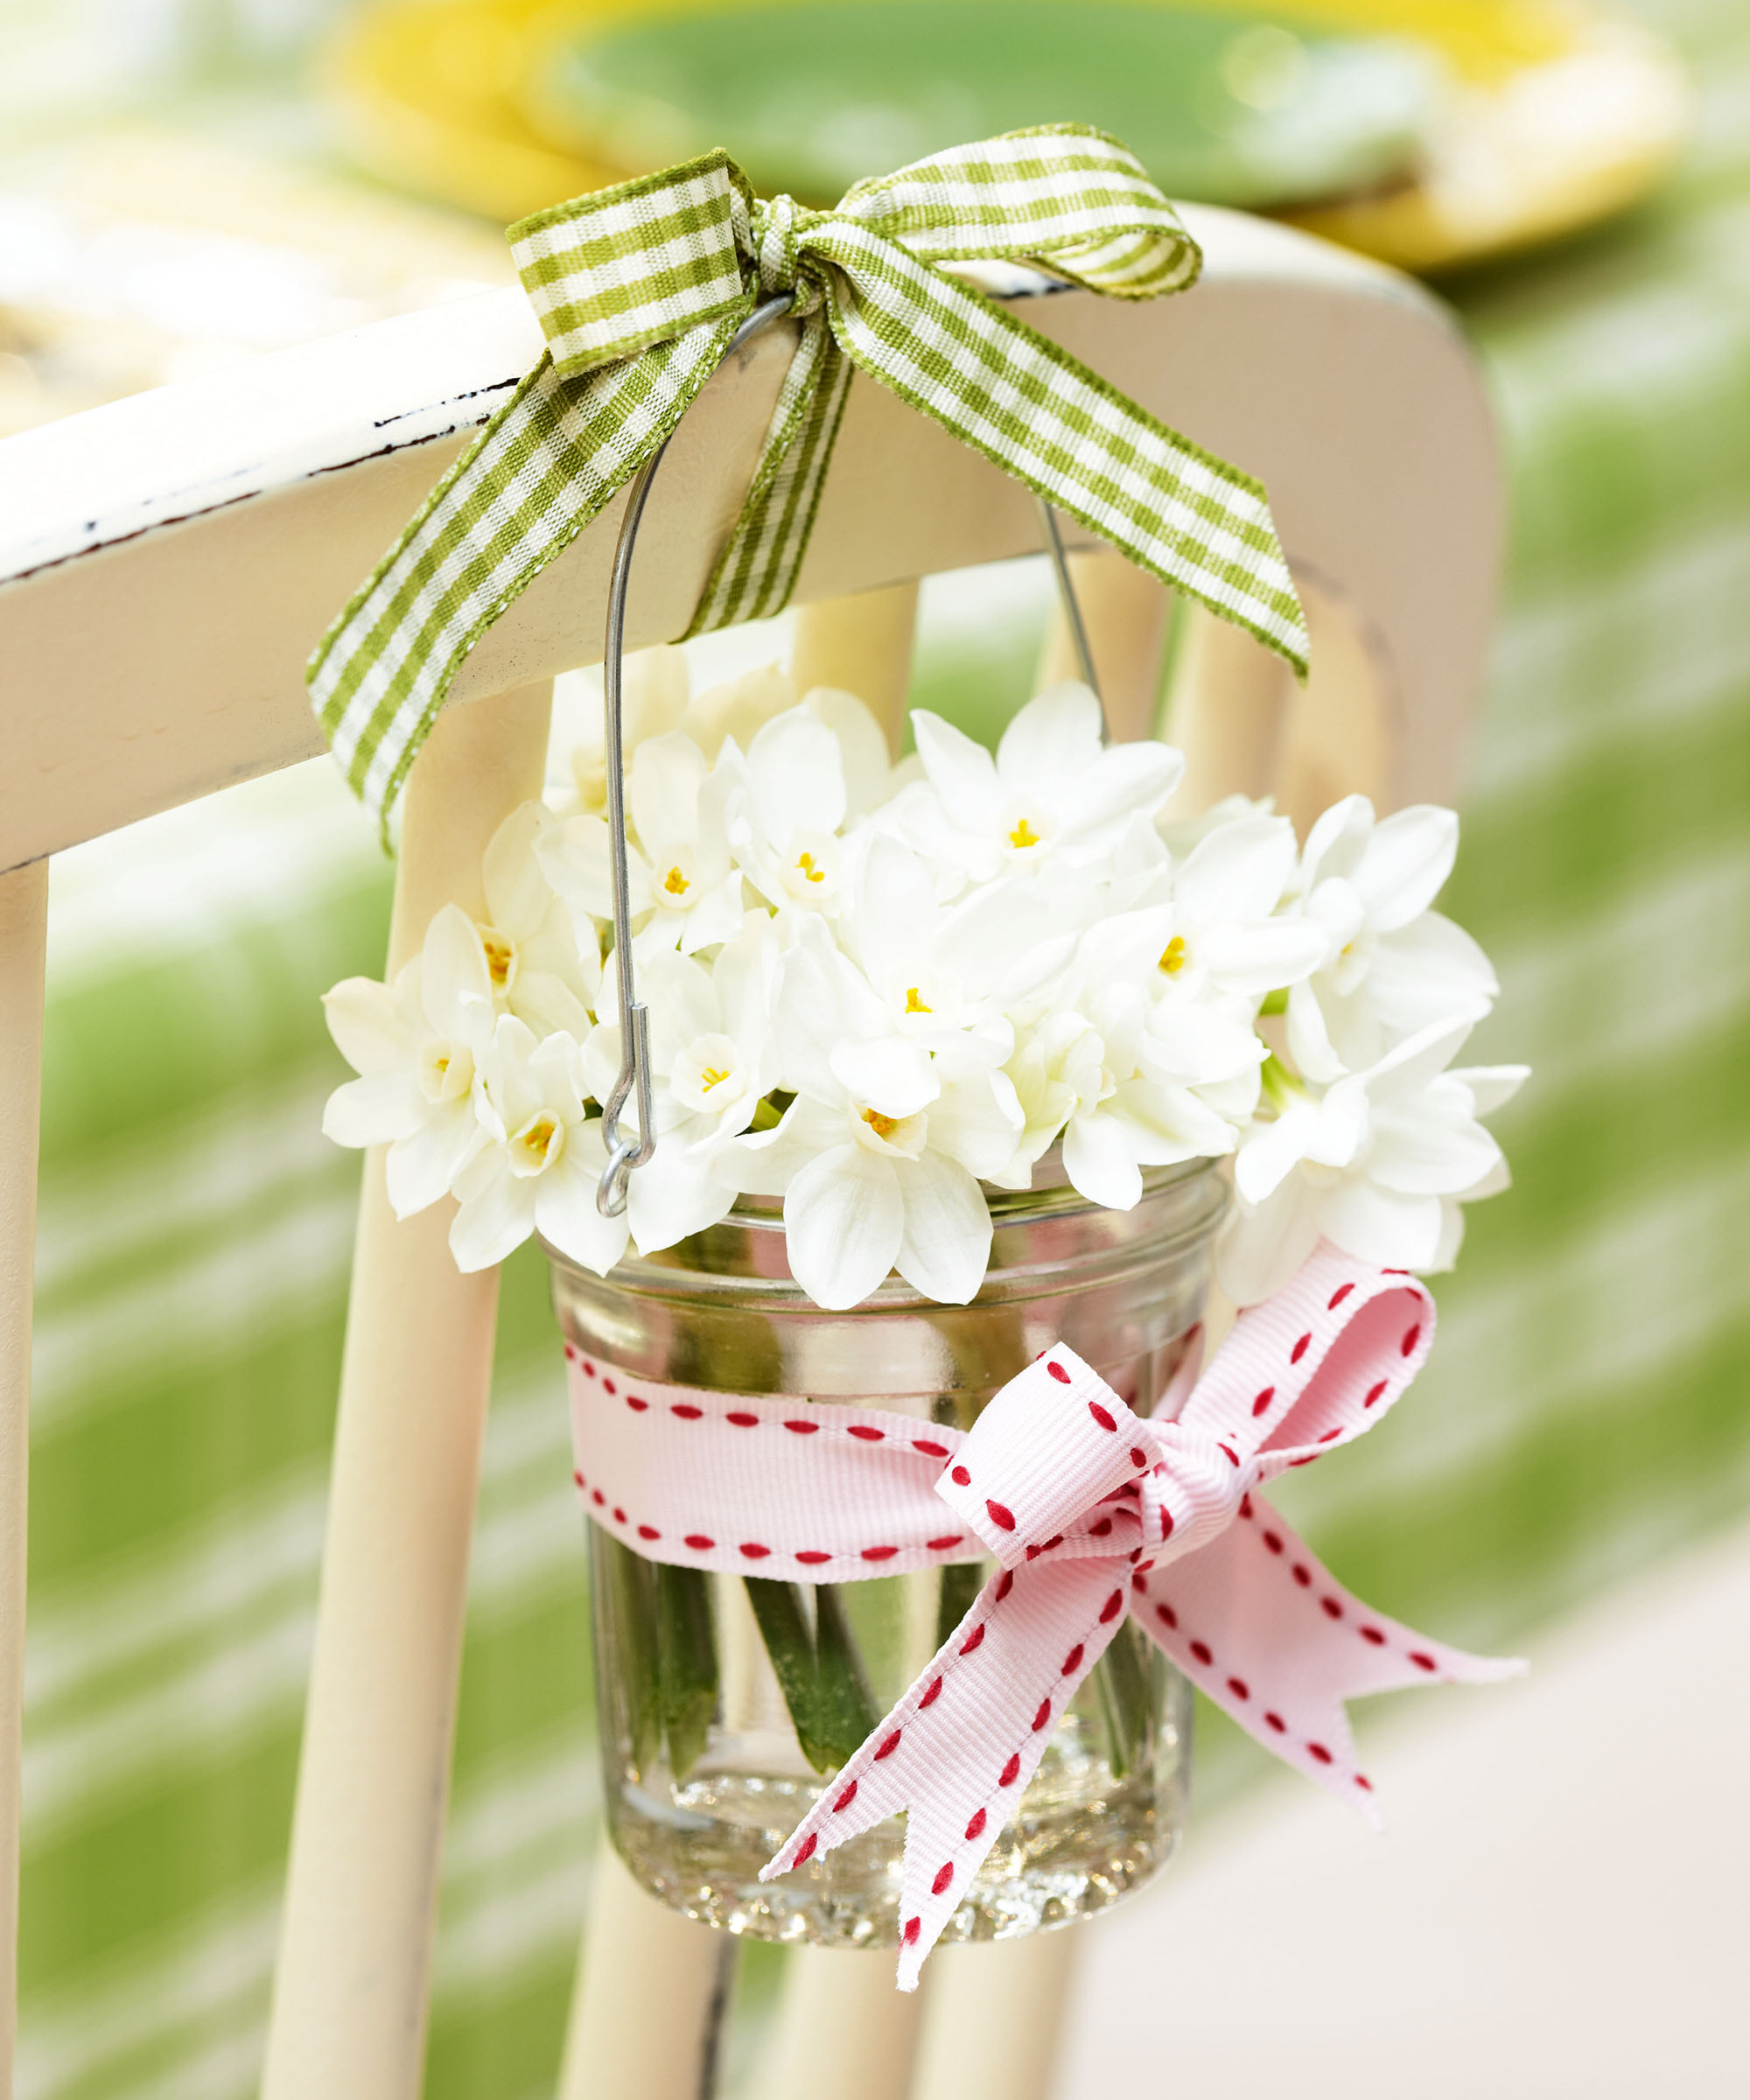 Jar filled with white daffodils hanging on chair back